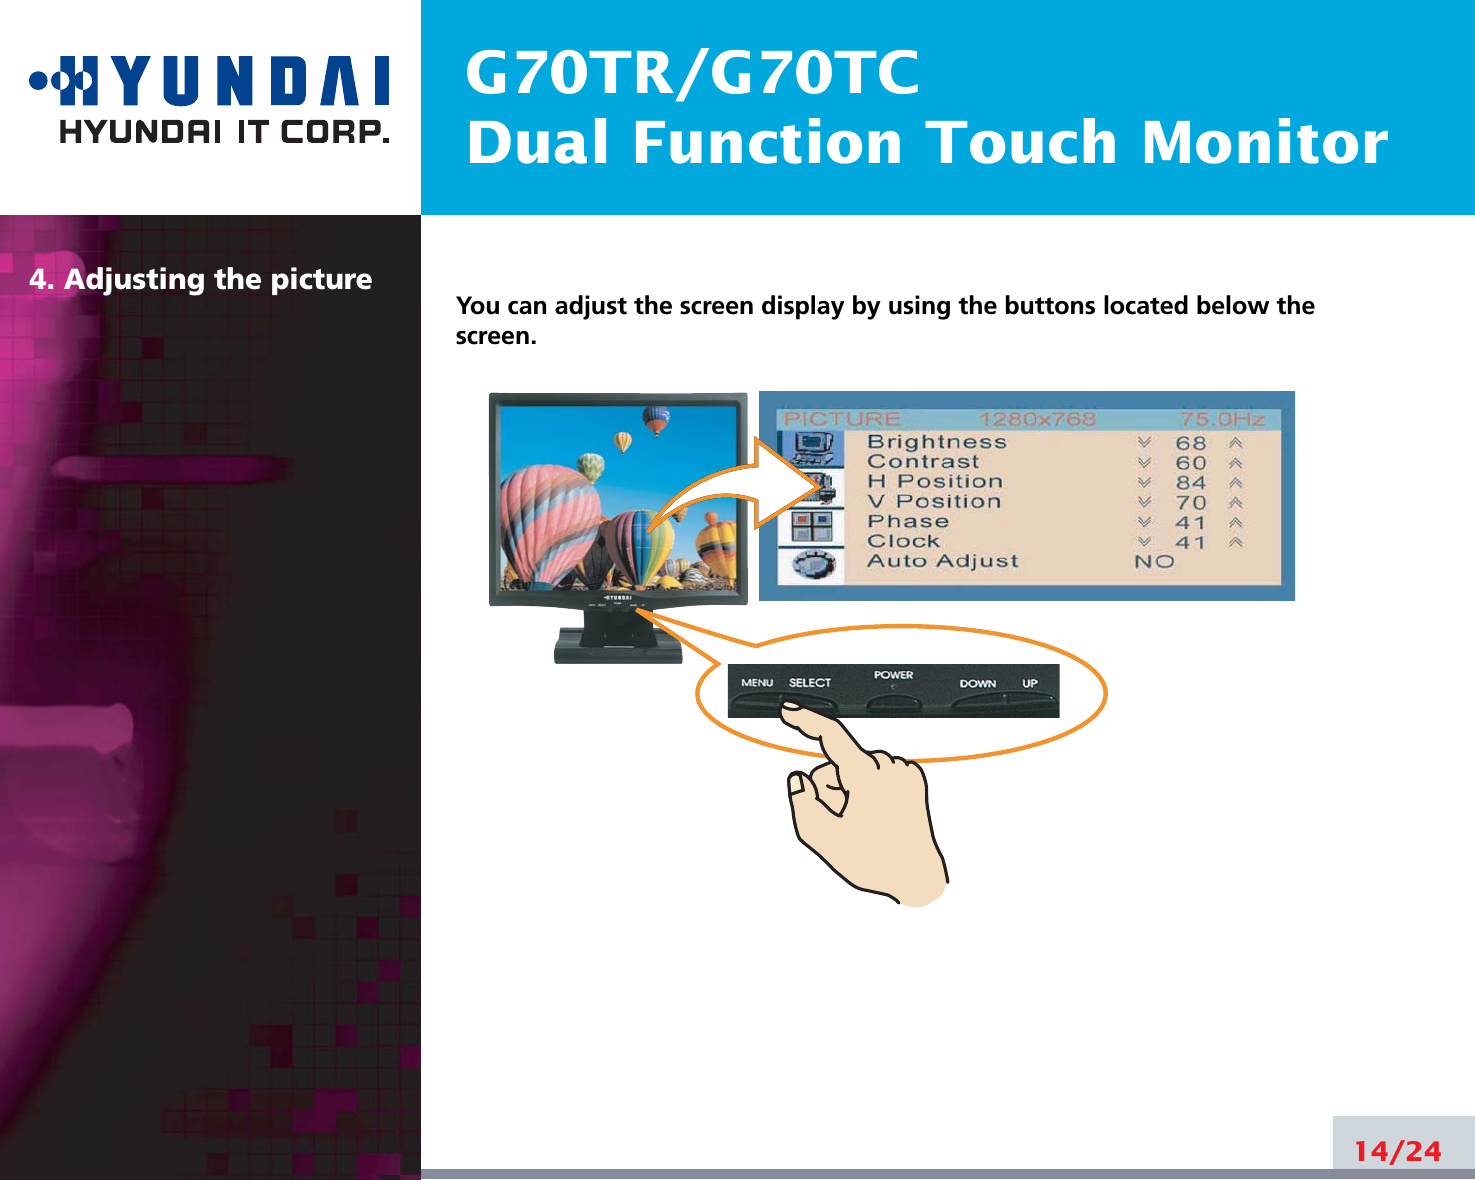 G70TR/G70TCDual Function Touch Monitor4. Adjusting the picture14/24You can adjust the screen display by using the buttons located below thescreen.